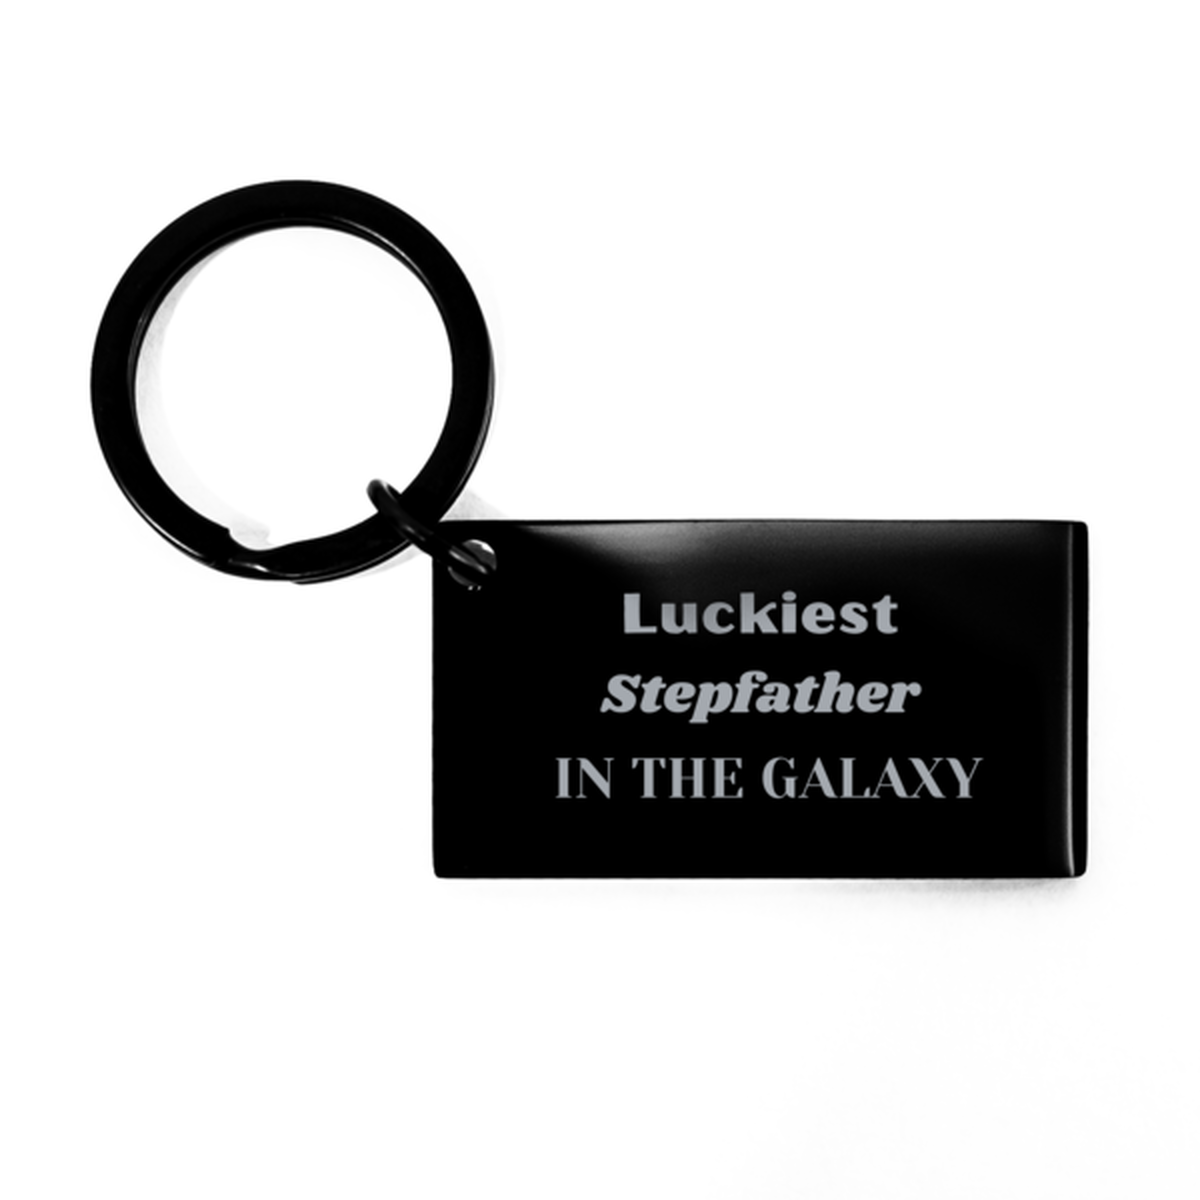 Luckiest Stepfather in the Galaxy, To My Stepfather Engraved Gifts, Christmas Stepfather Keychain Gifts, X-mas Birthday Unique Gifts For Stepfather Men Women